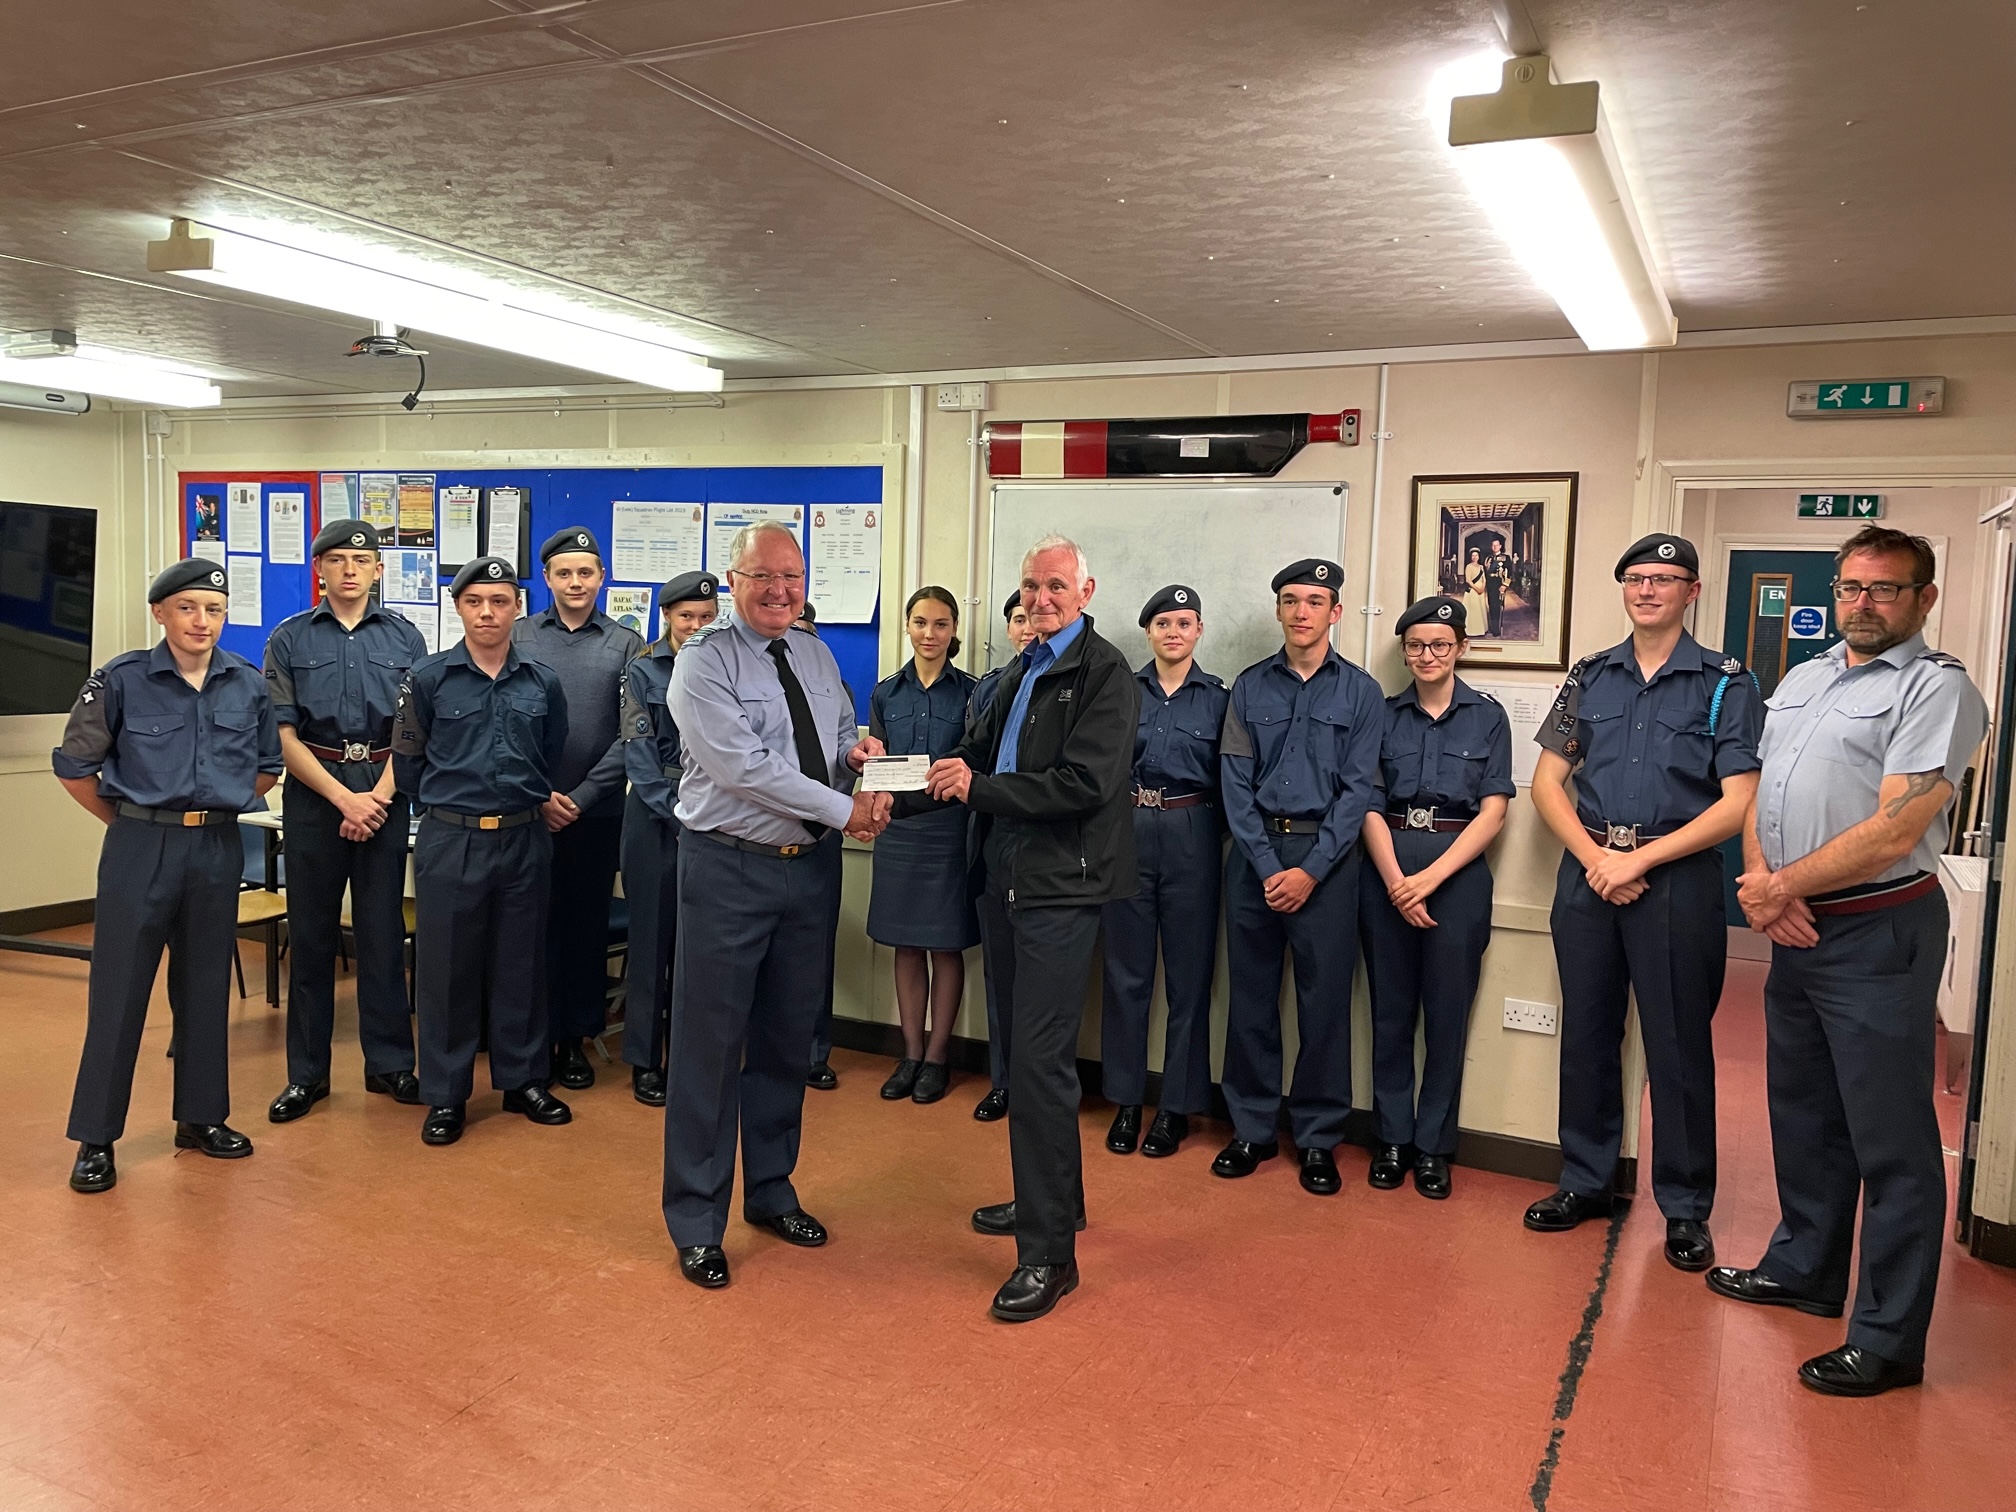 Staffordshire Freemasons and members of the St Edwards Lodge visit the 60 Leek Squadron Air Cadets at their premises